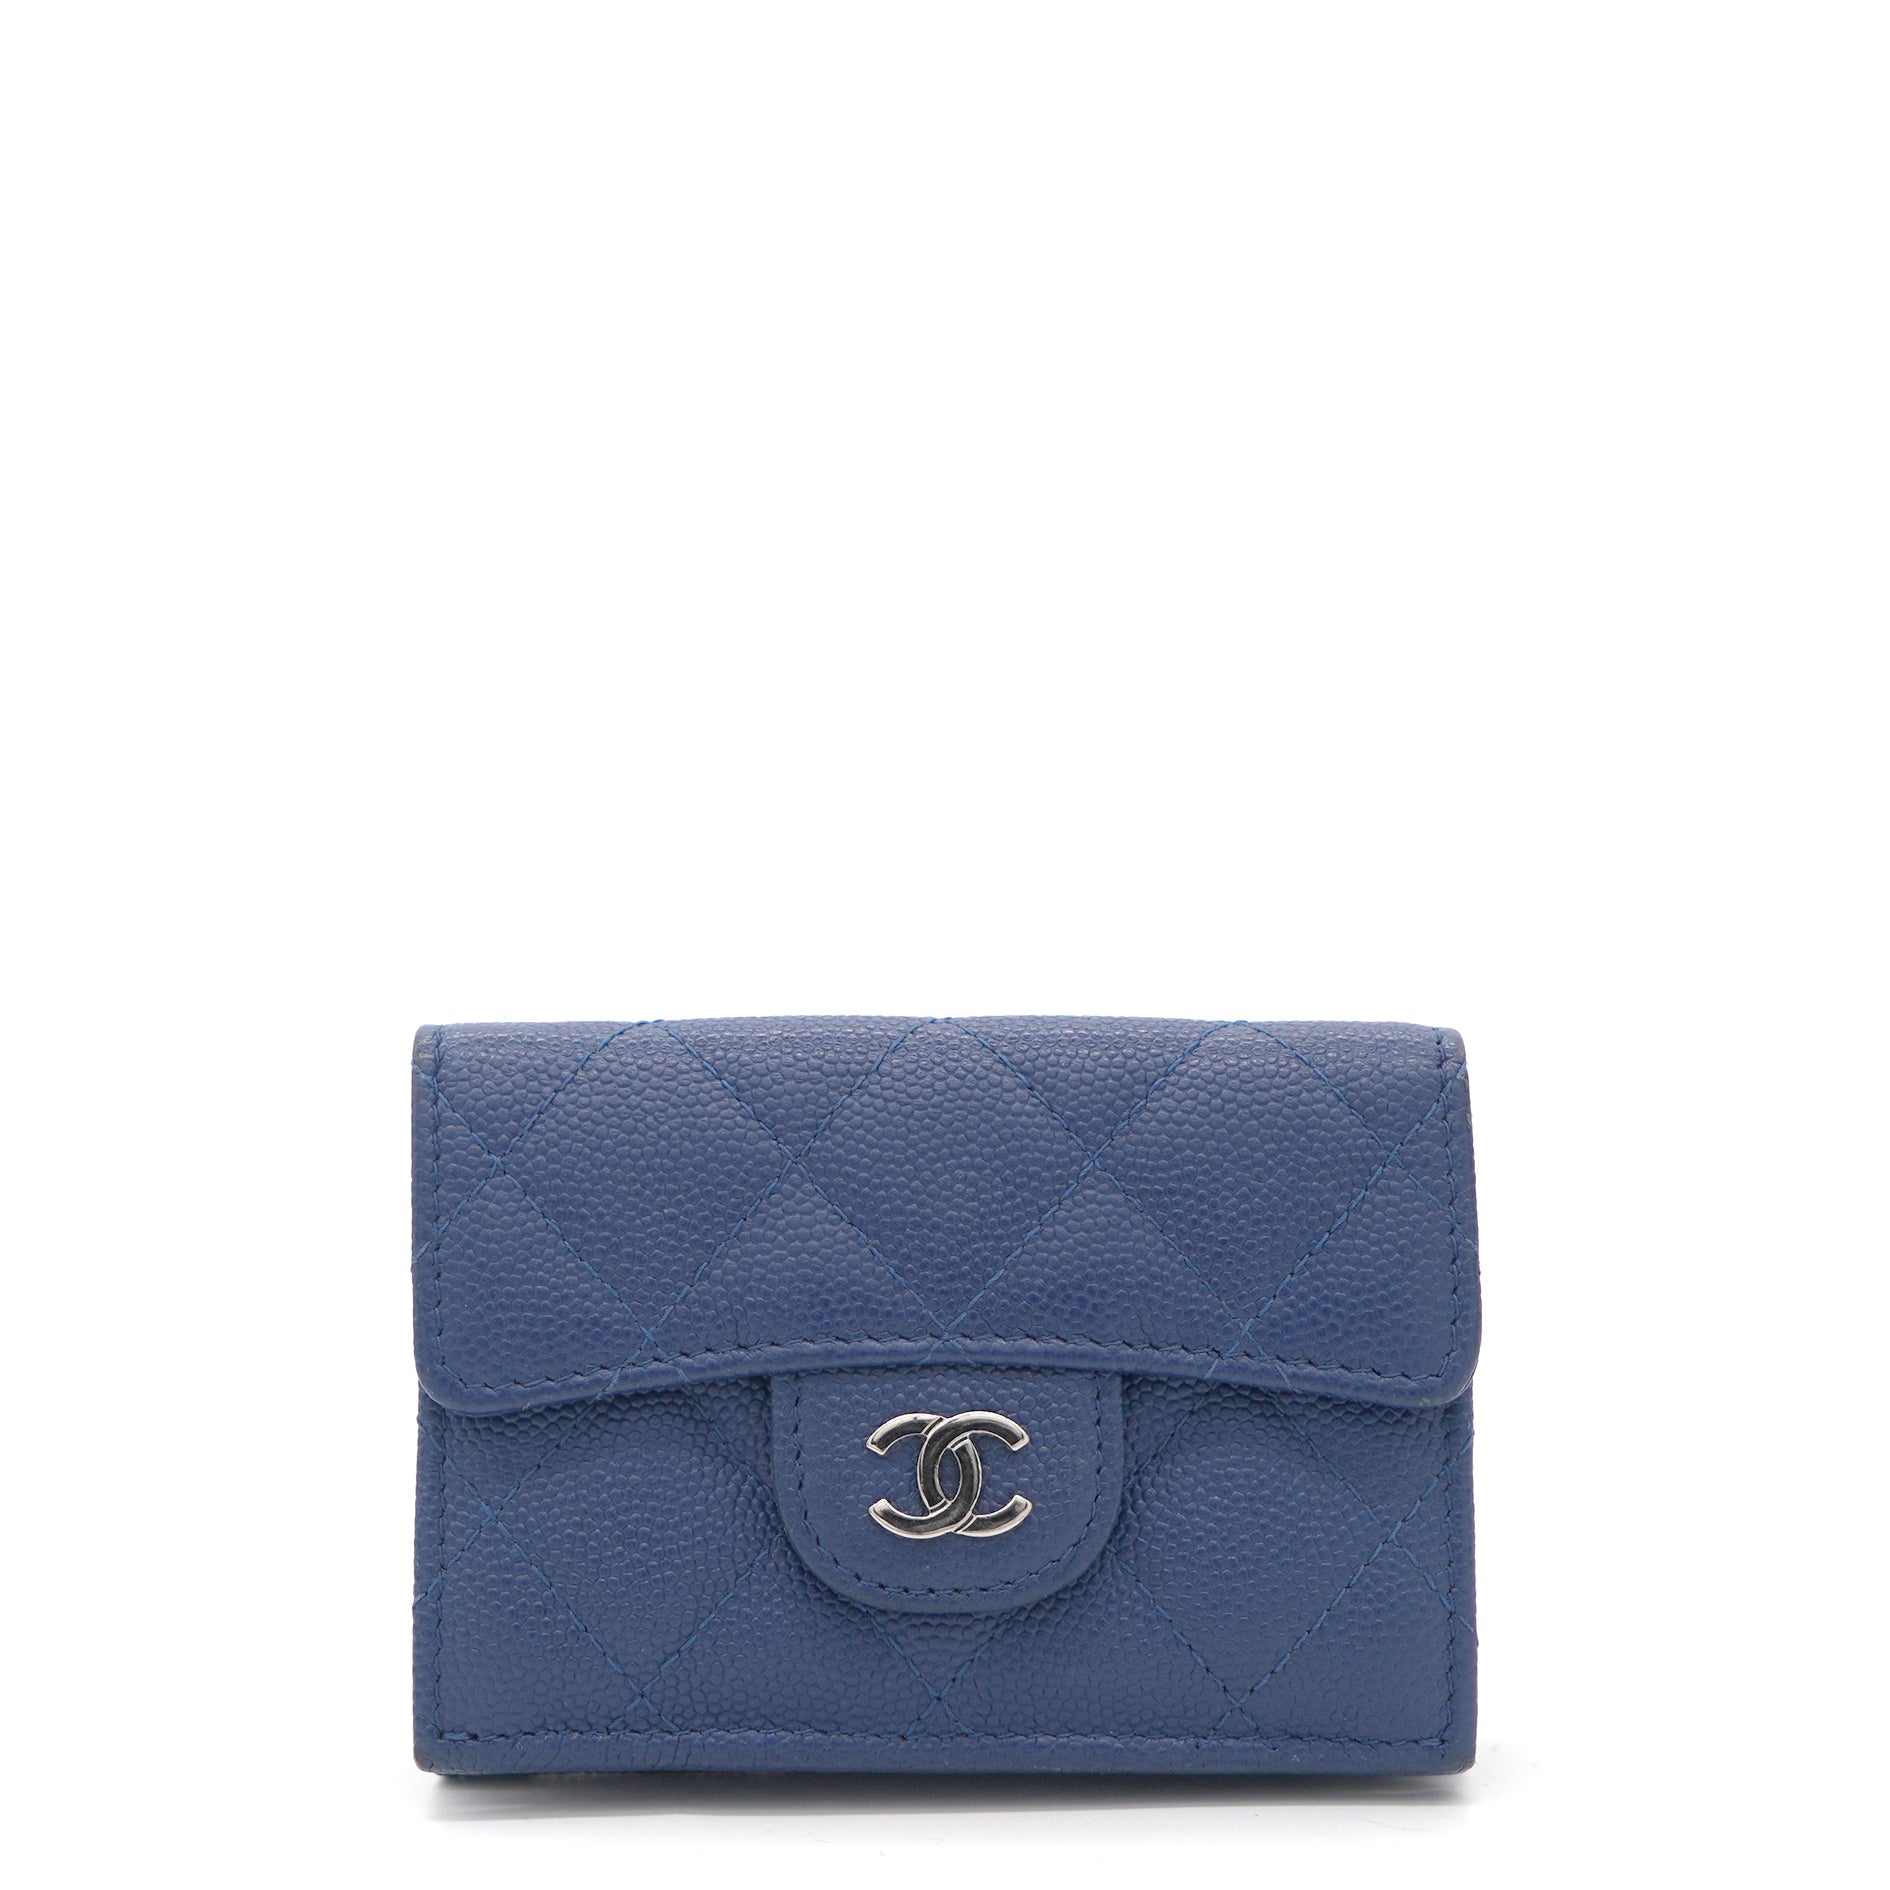 Chanel Classic Quilted Tri Fold Compact Wallet Navy Caviar – ＬＯＶＥＬＯＴＳＬＵＸＵＲＹ